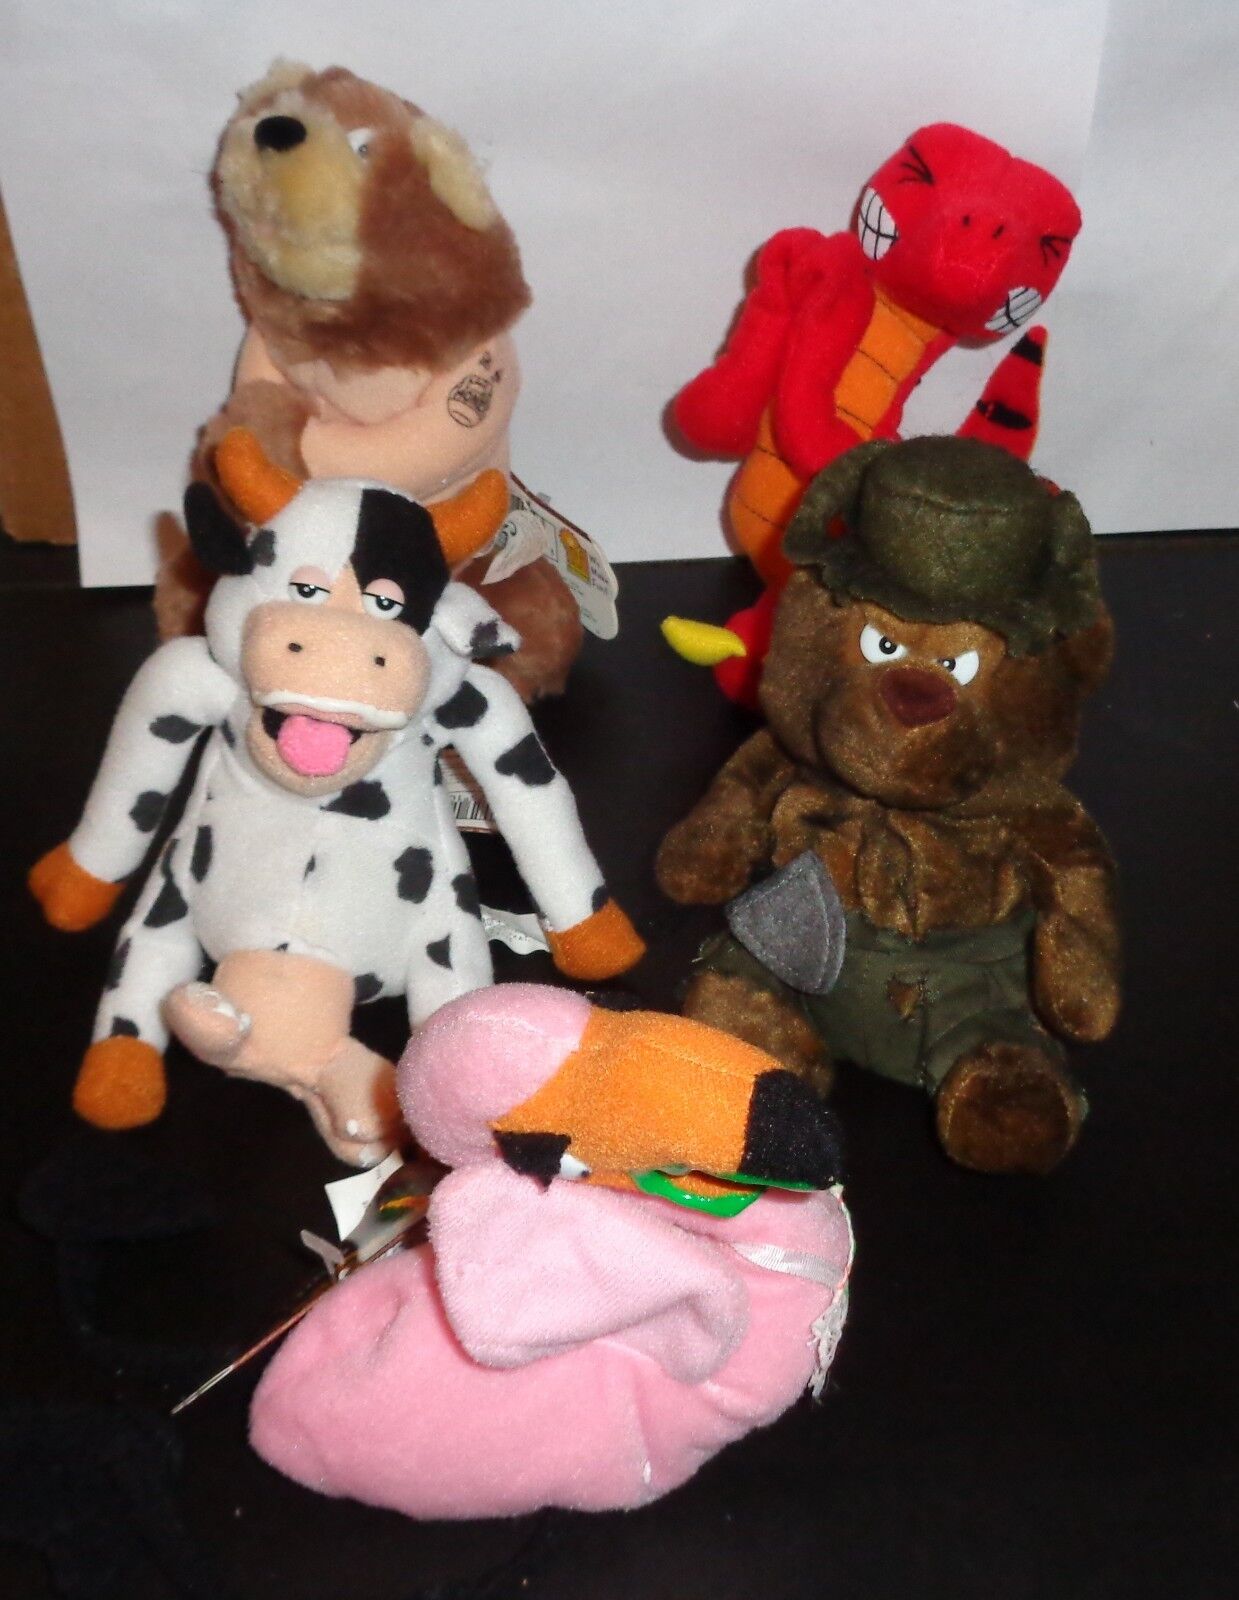 Group of 5 MEANIES BEANIES SERIES 2 with TAGS Not Played With